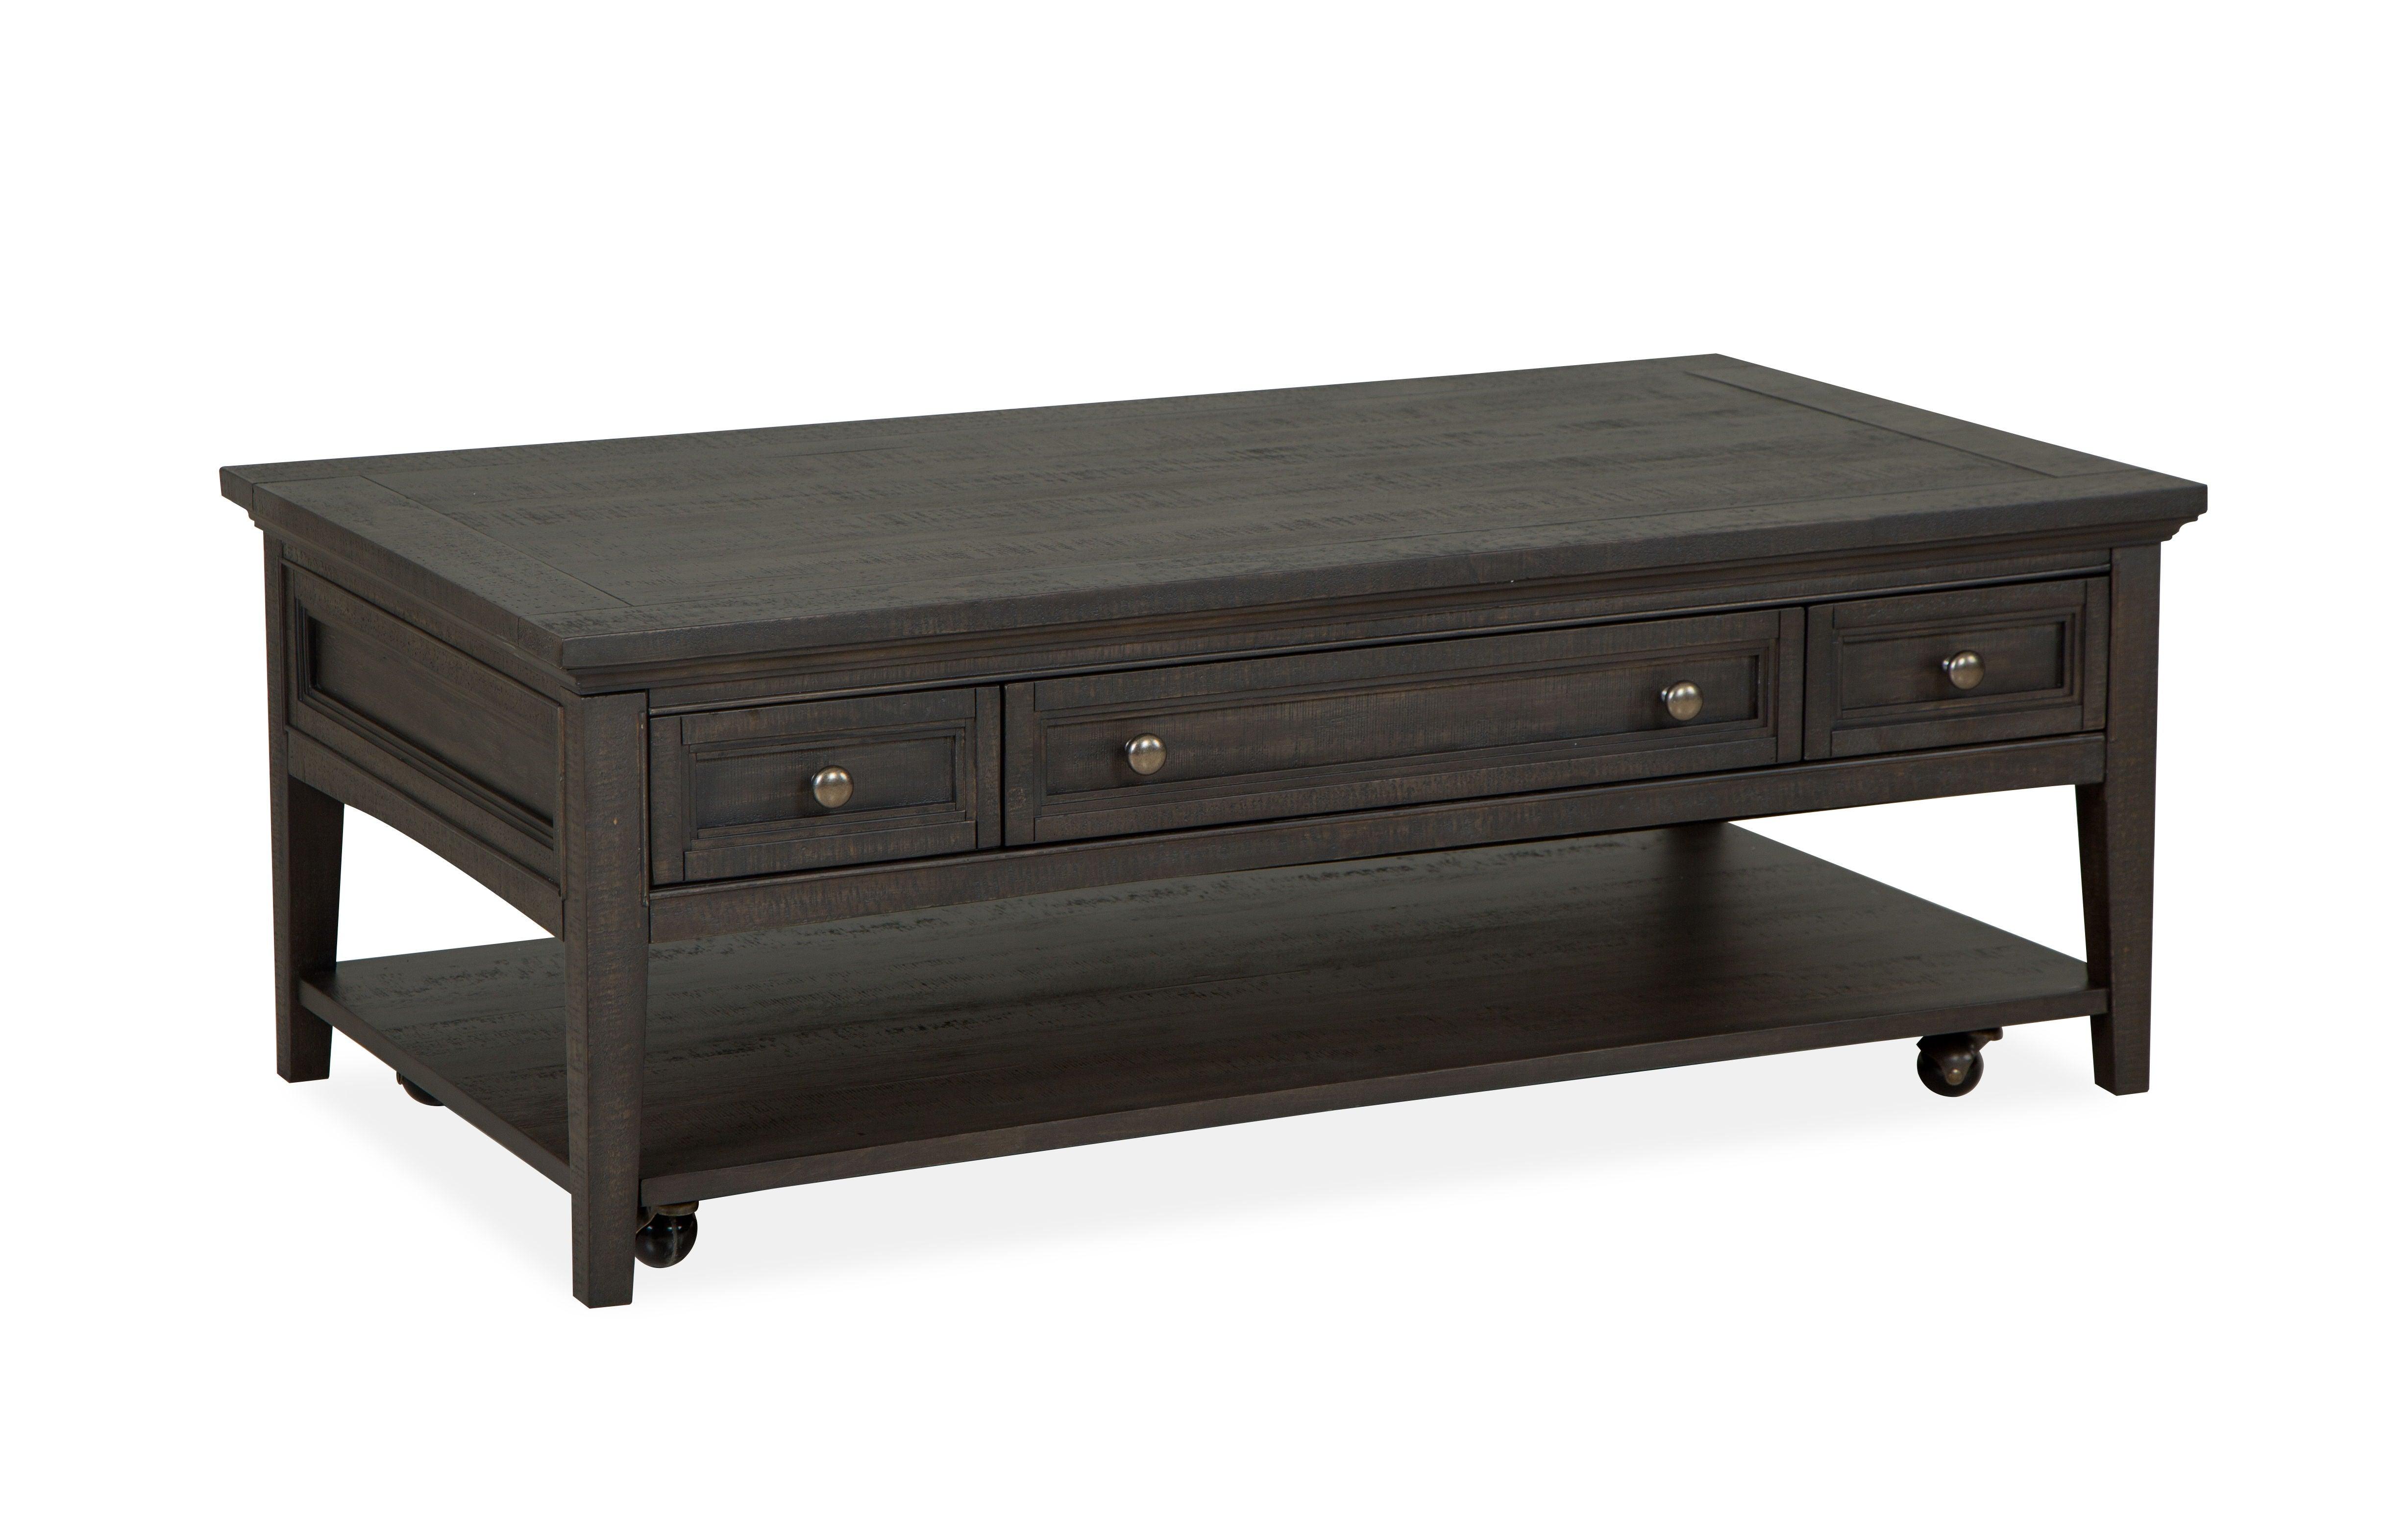 Magnussen Furniture - Westley Falls - Rectangular Cocktail Table With Casters - Graphite - 5th Avenue Furniture